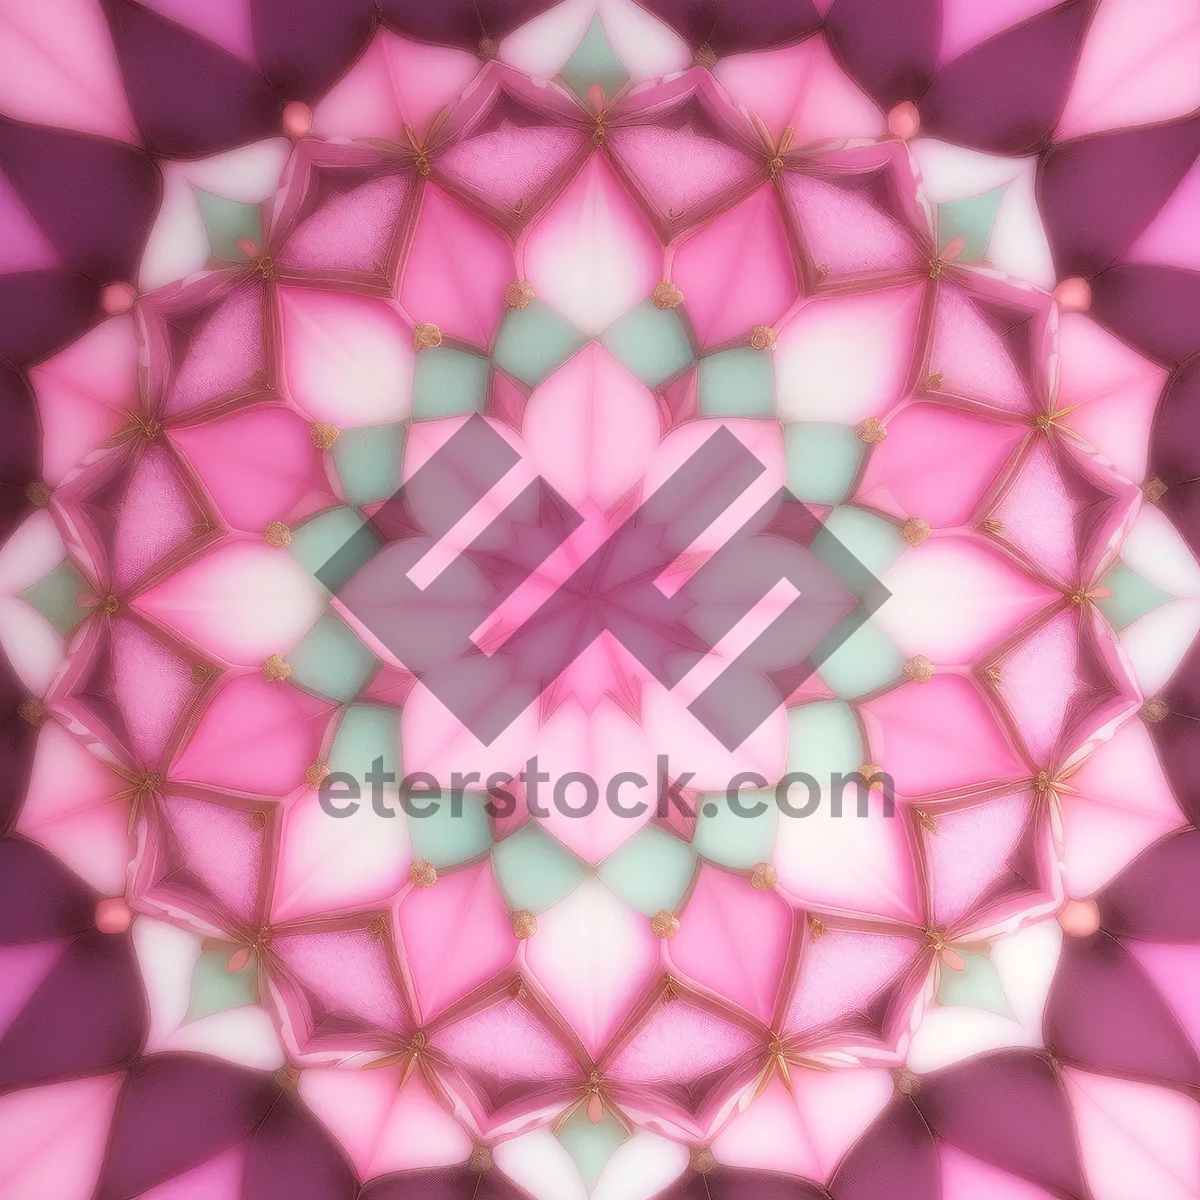 Picture of Lilac Geometric Floral Design Tile